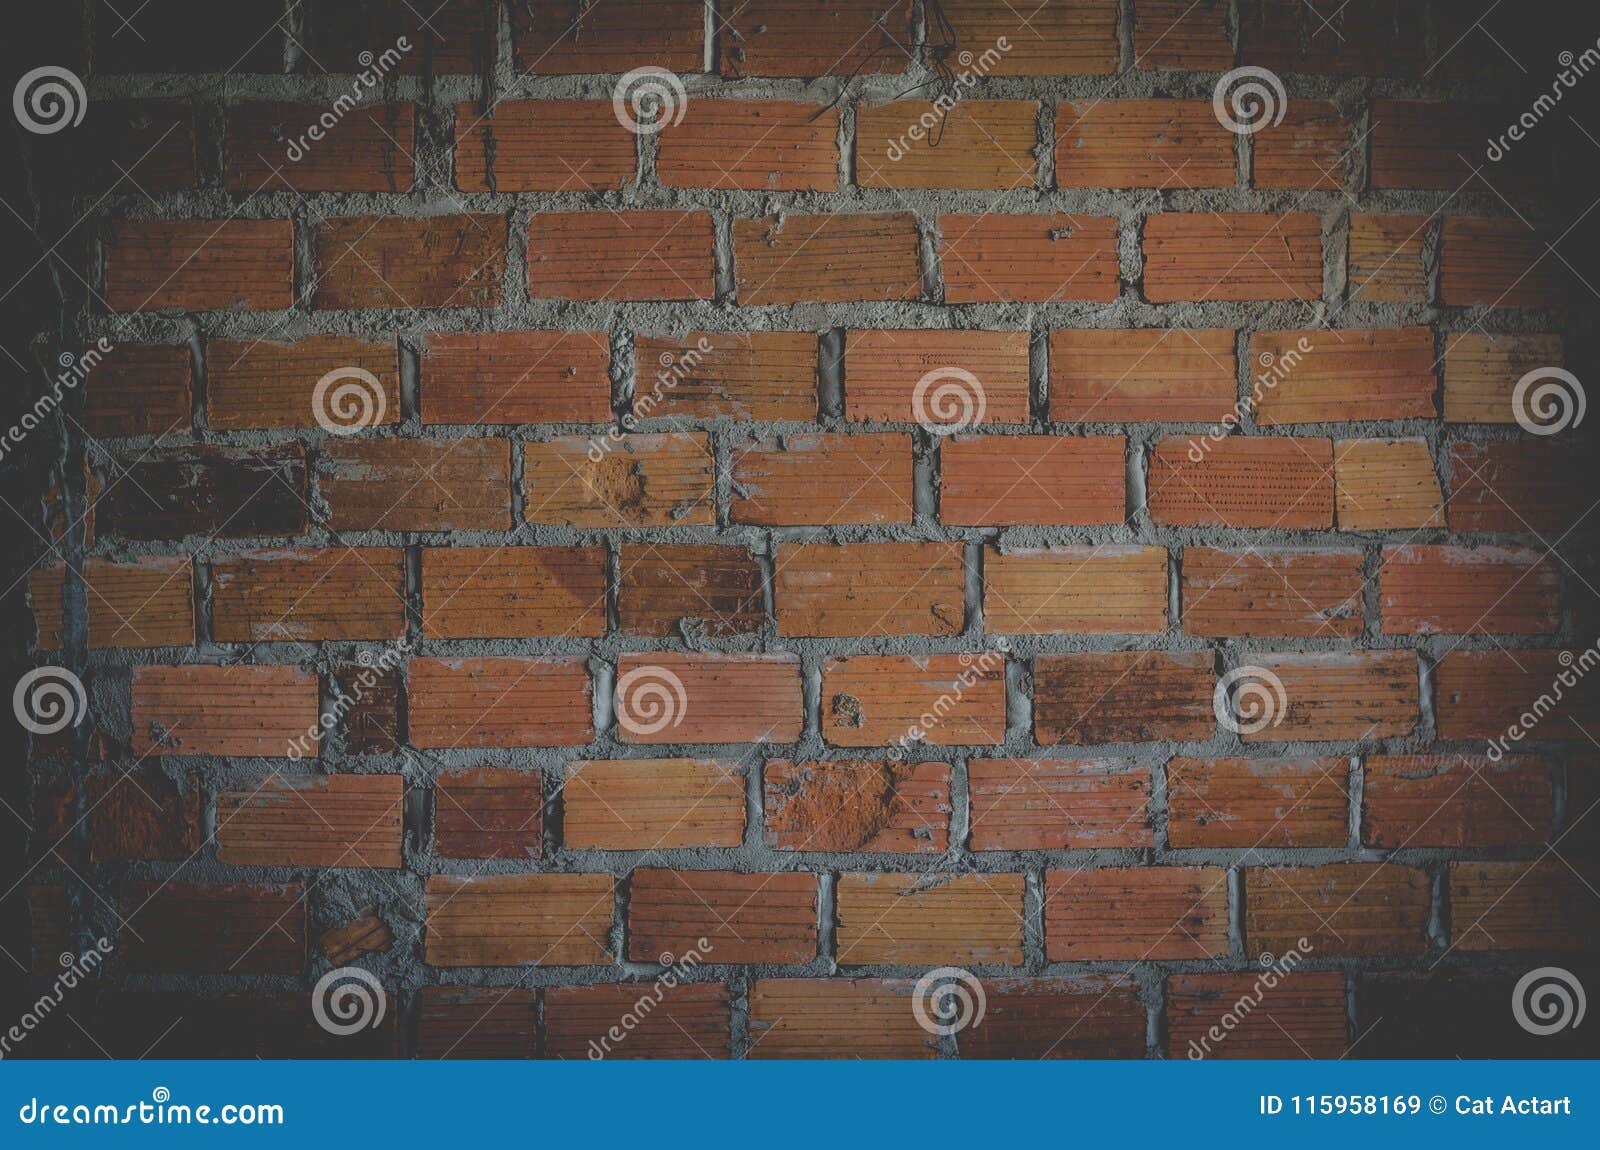 Brick Materials Building Wall Texture Background Stock Image